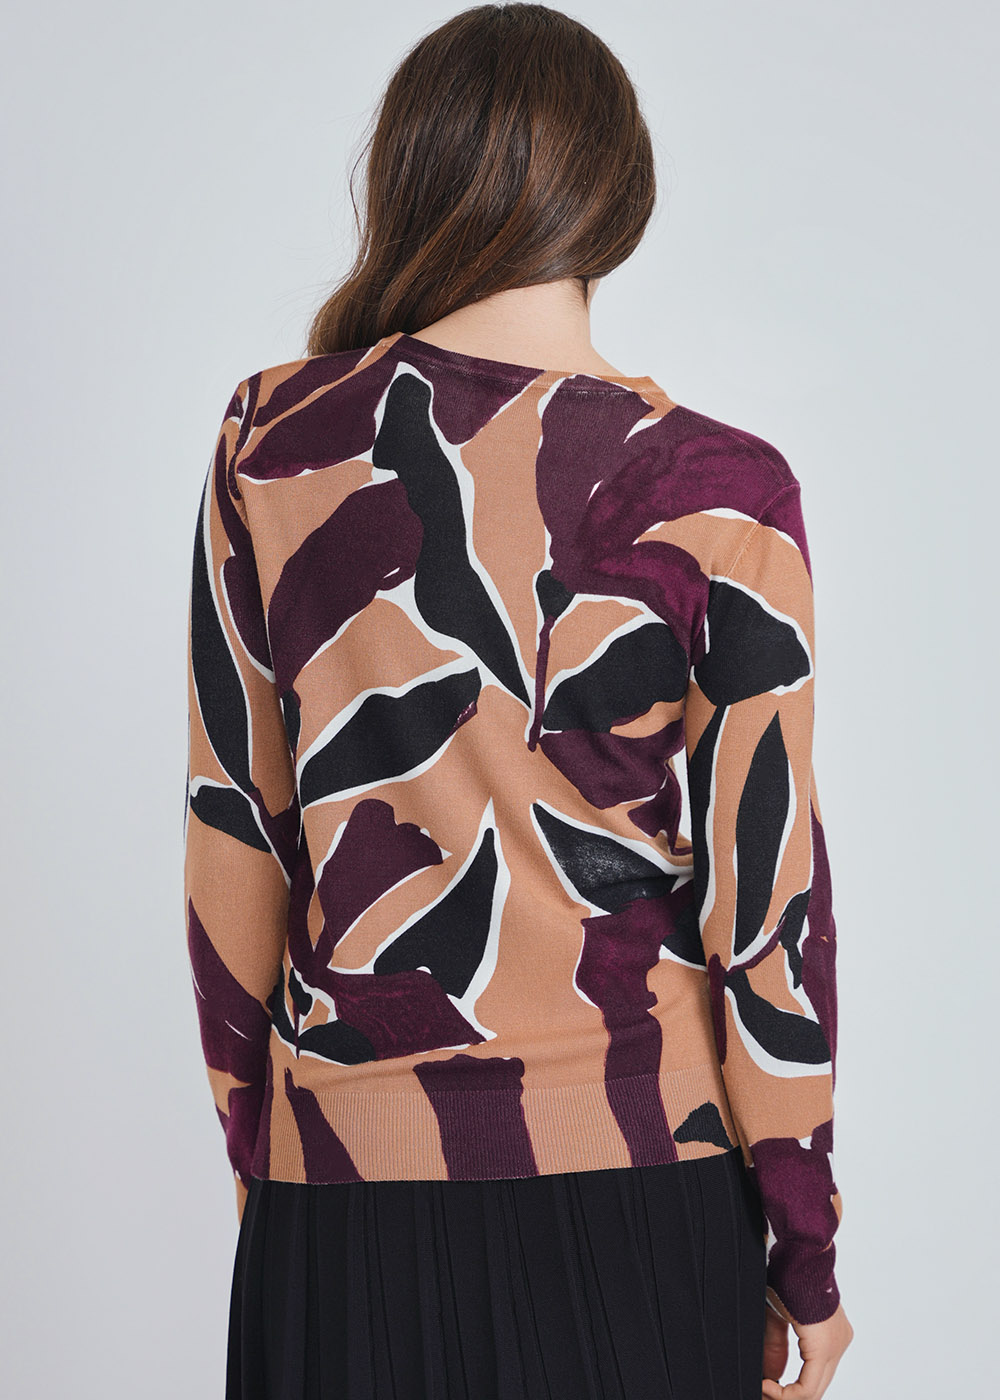 Softened Shades: Abstract Burgundy & Camel Knit Top